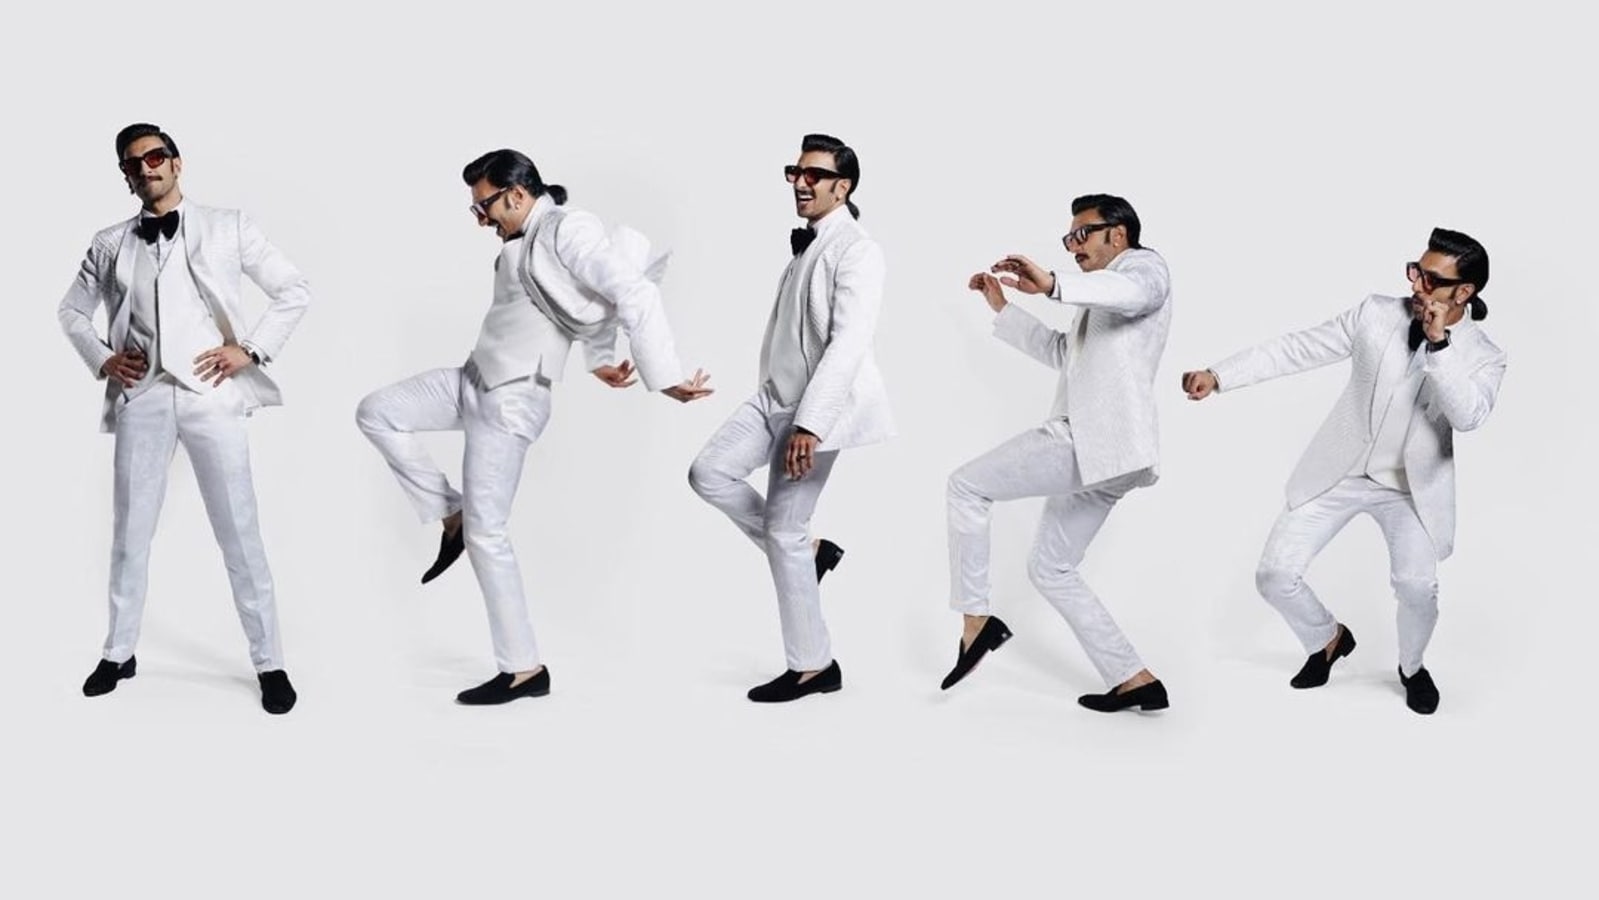 Ranveer Singh Serves Eclectic Fashion Vibes in a Classic White